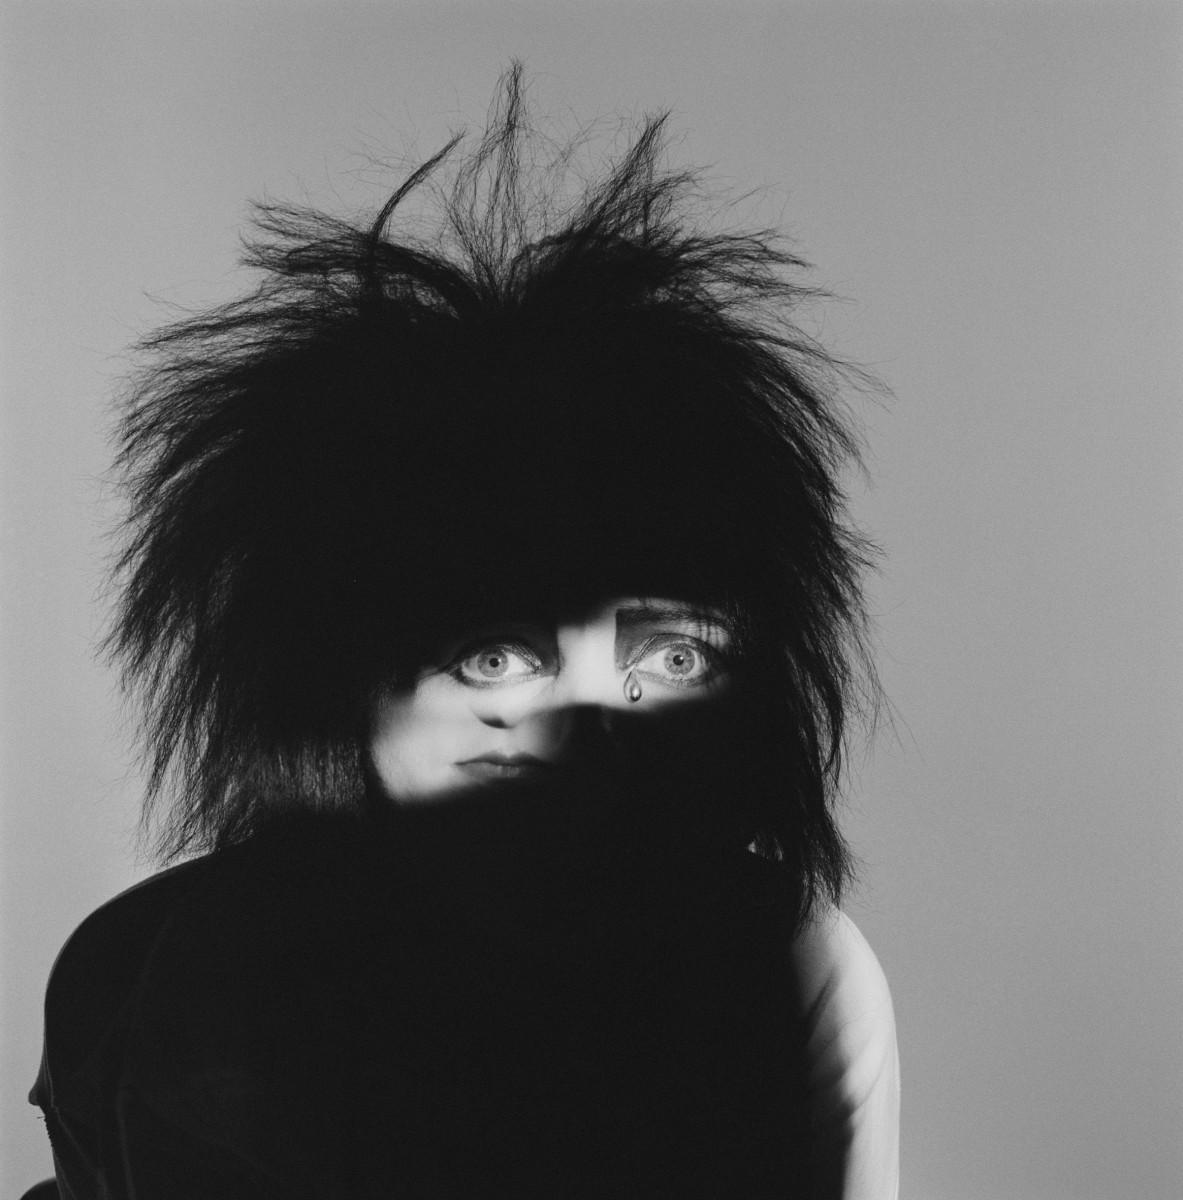 Siouxsie Rotherhithe studio, Londres, Retrospective, 1984. Brian Griffin